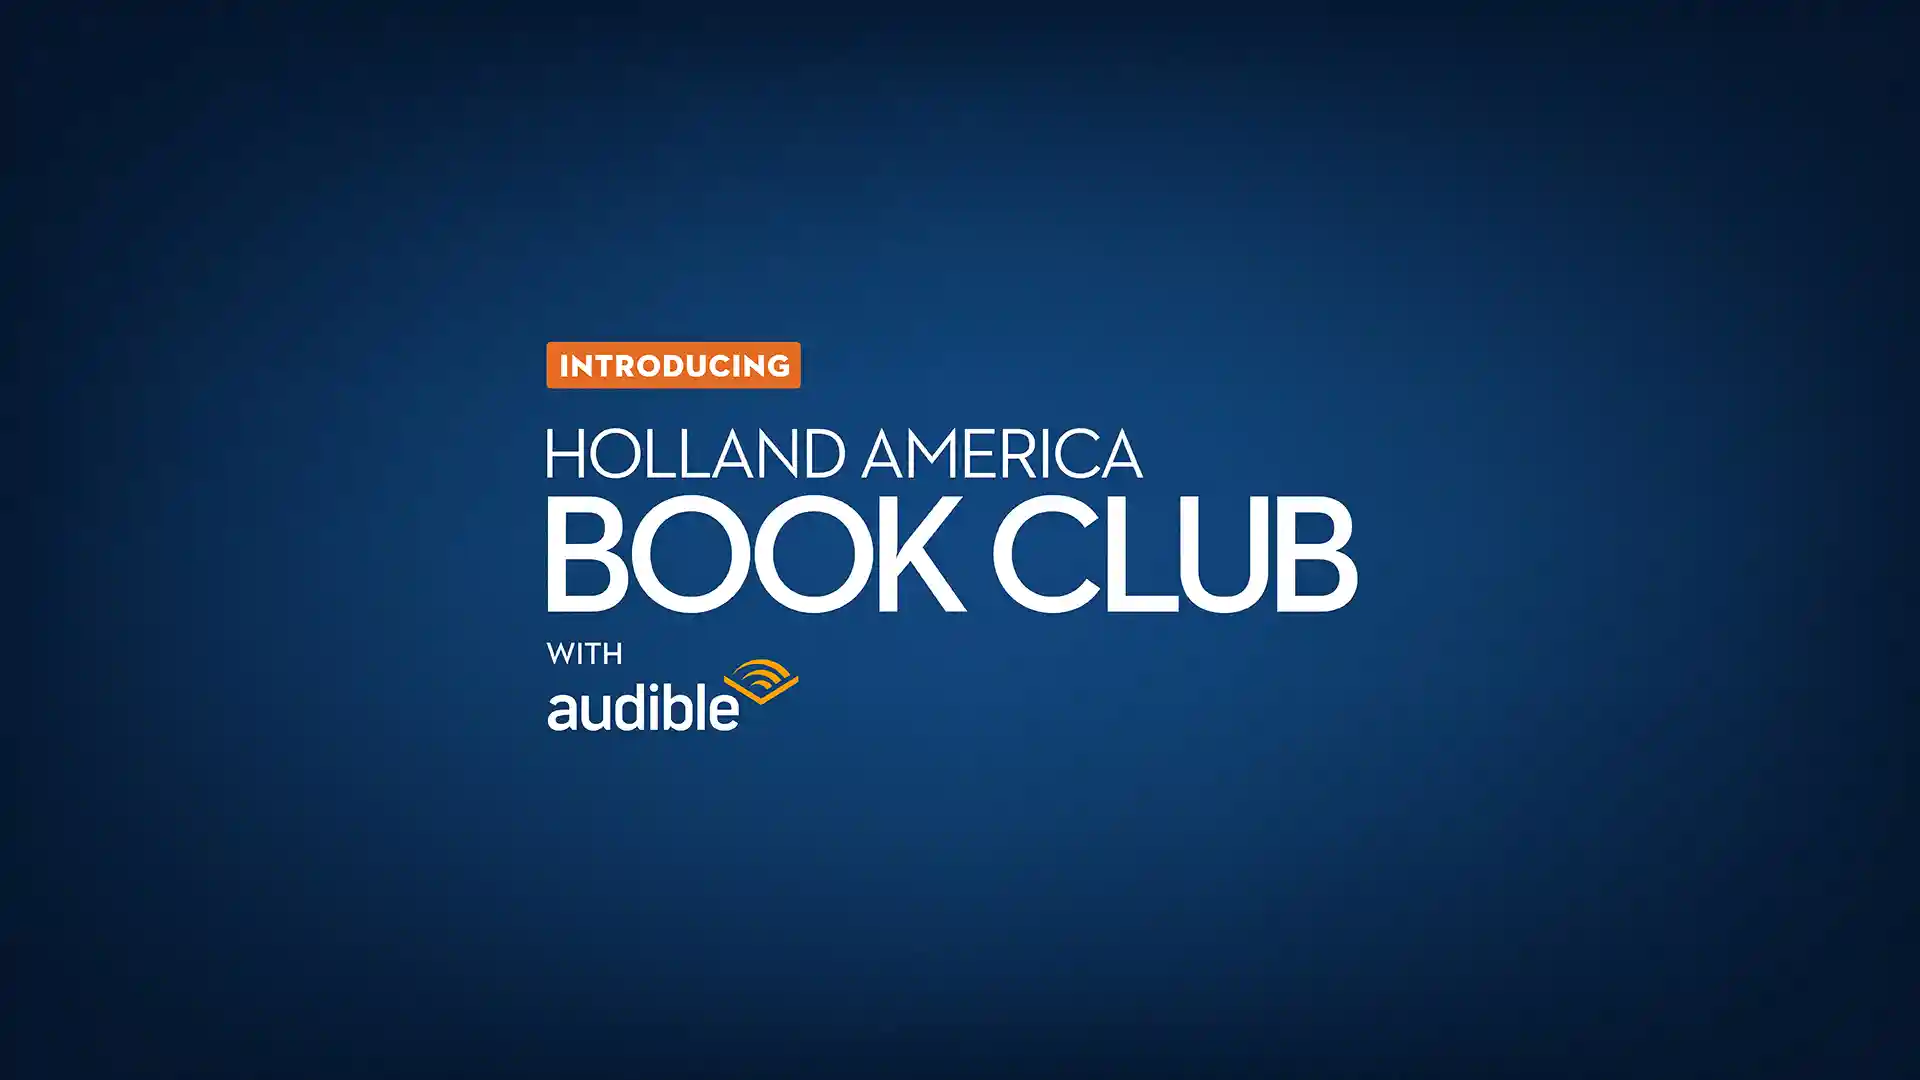 We’re Teaming Up with Audible on Our New Book Club